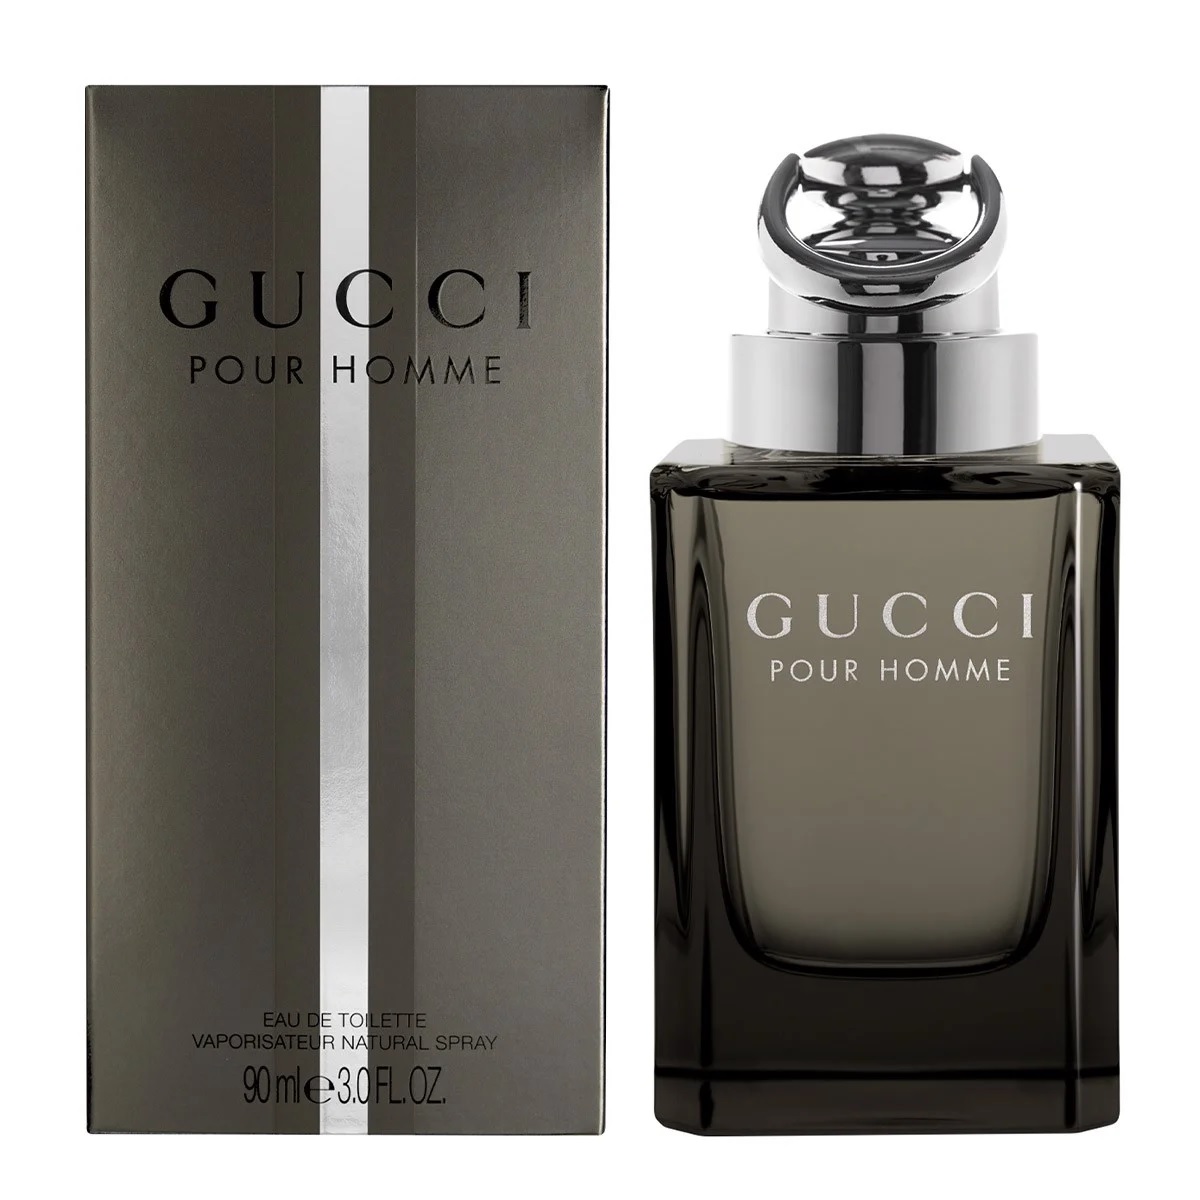 Gucci-Pour-Homme-EDT-gia-tot-nhat